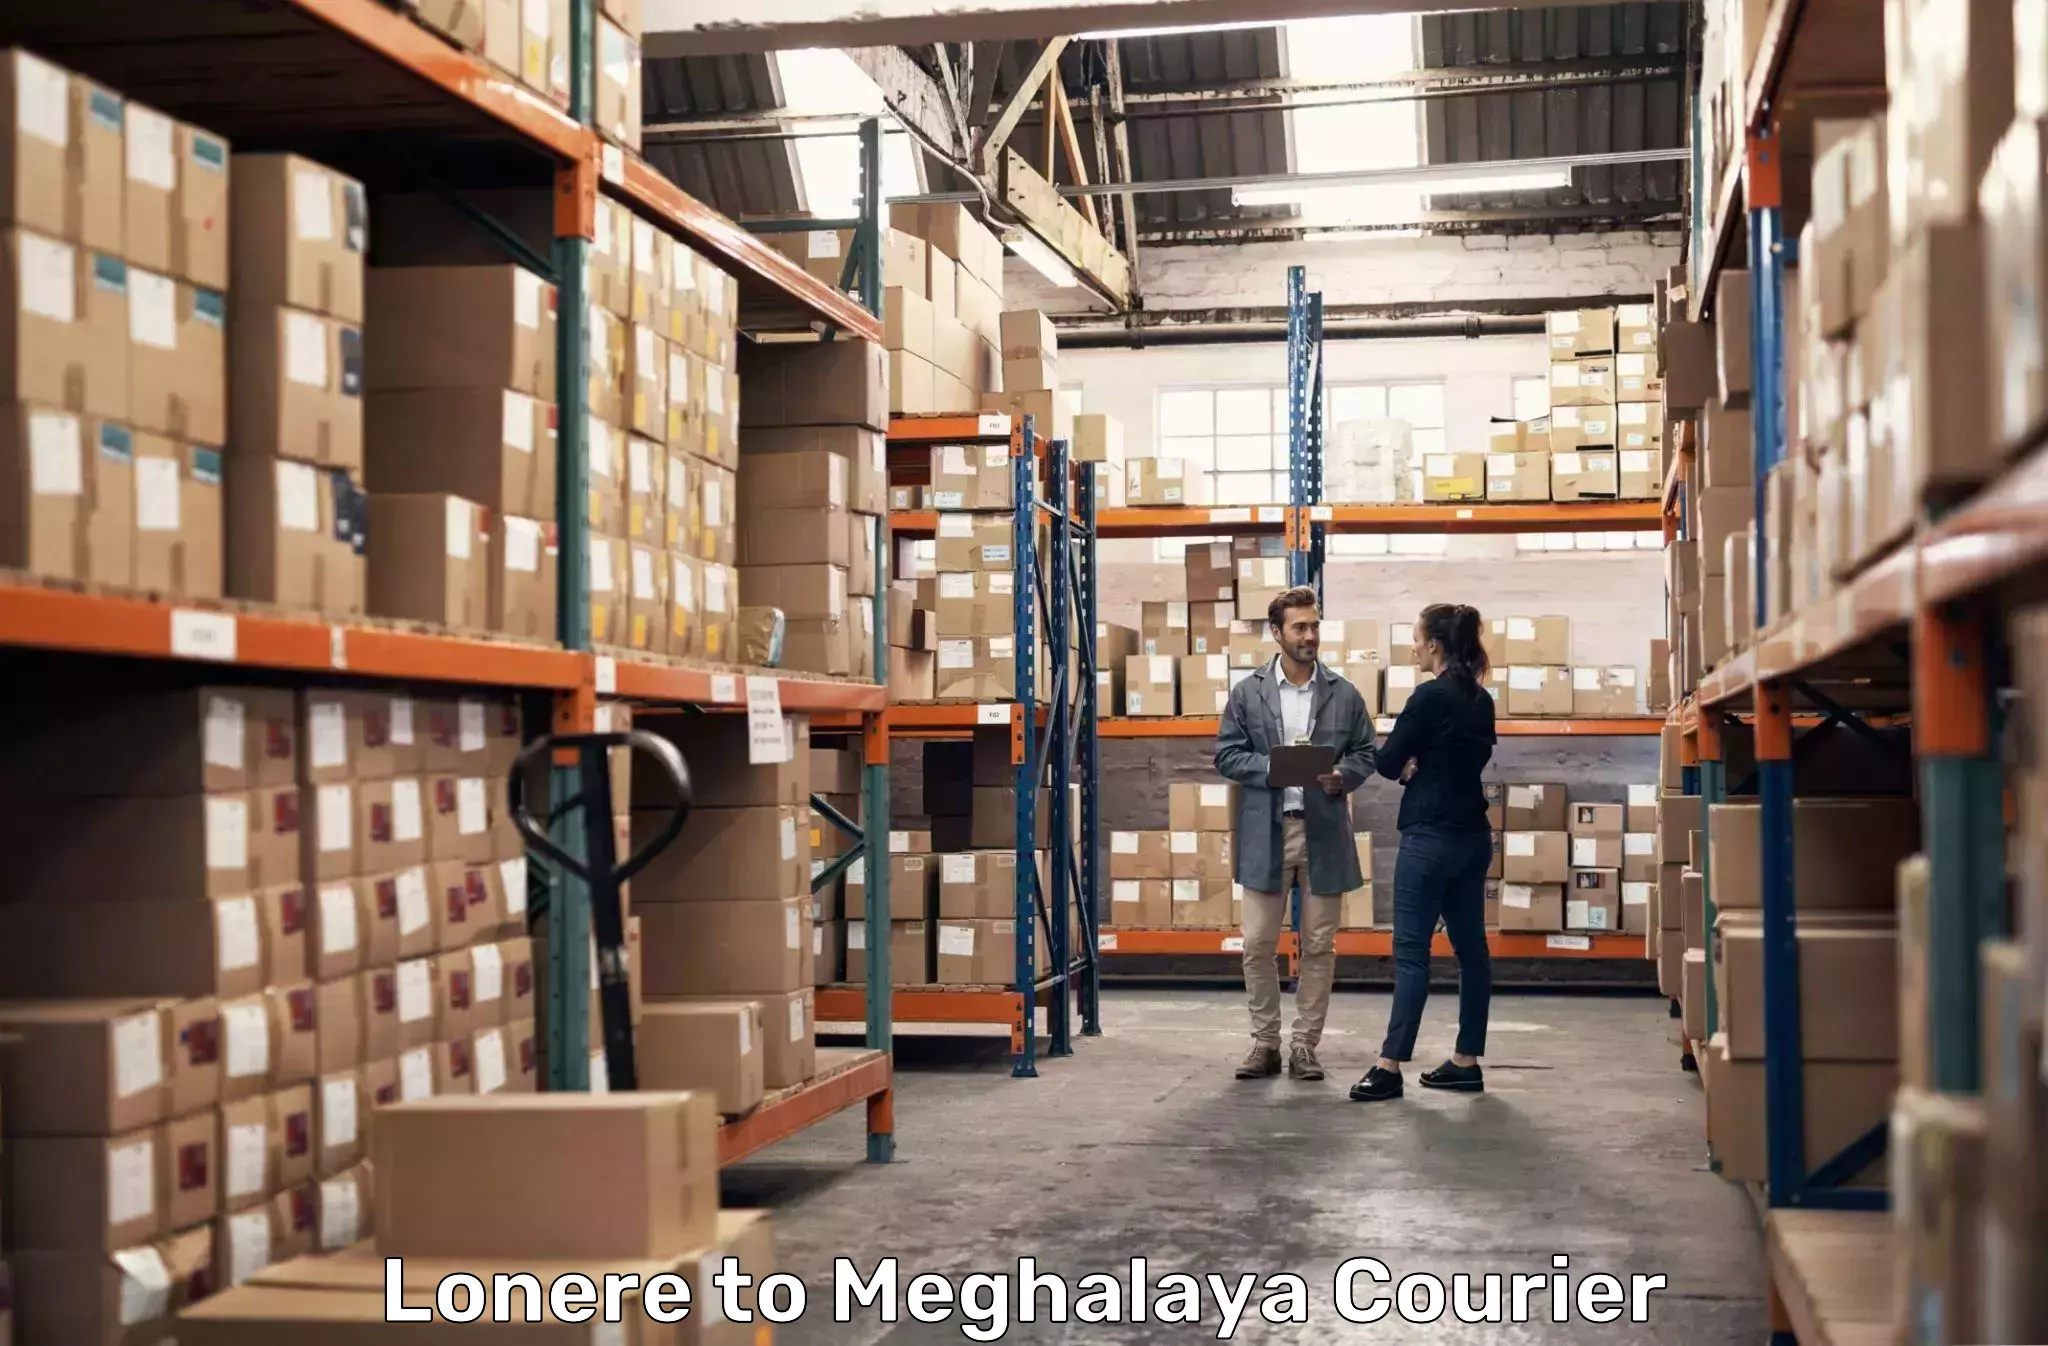 Domestic courier Lonere to Meghalaya